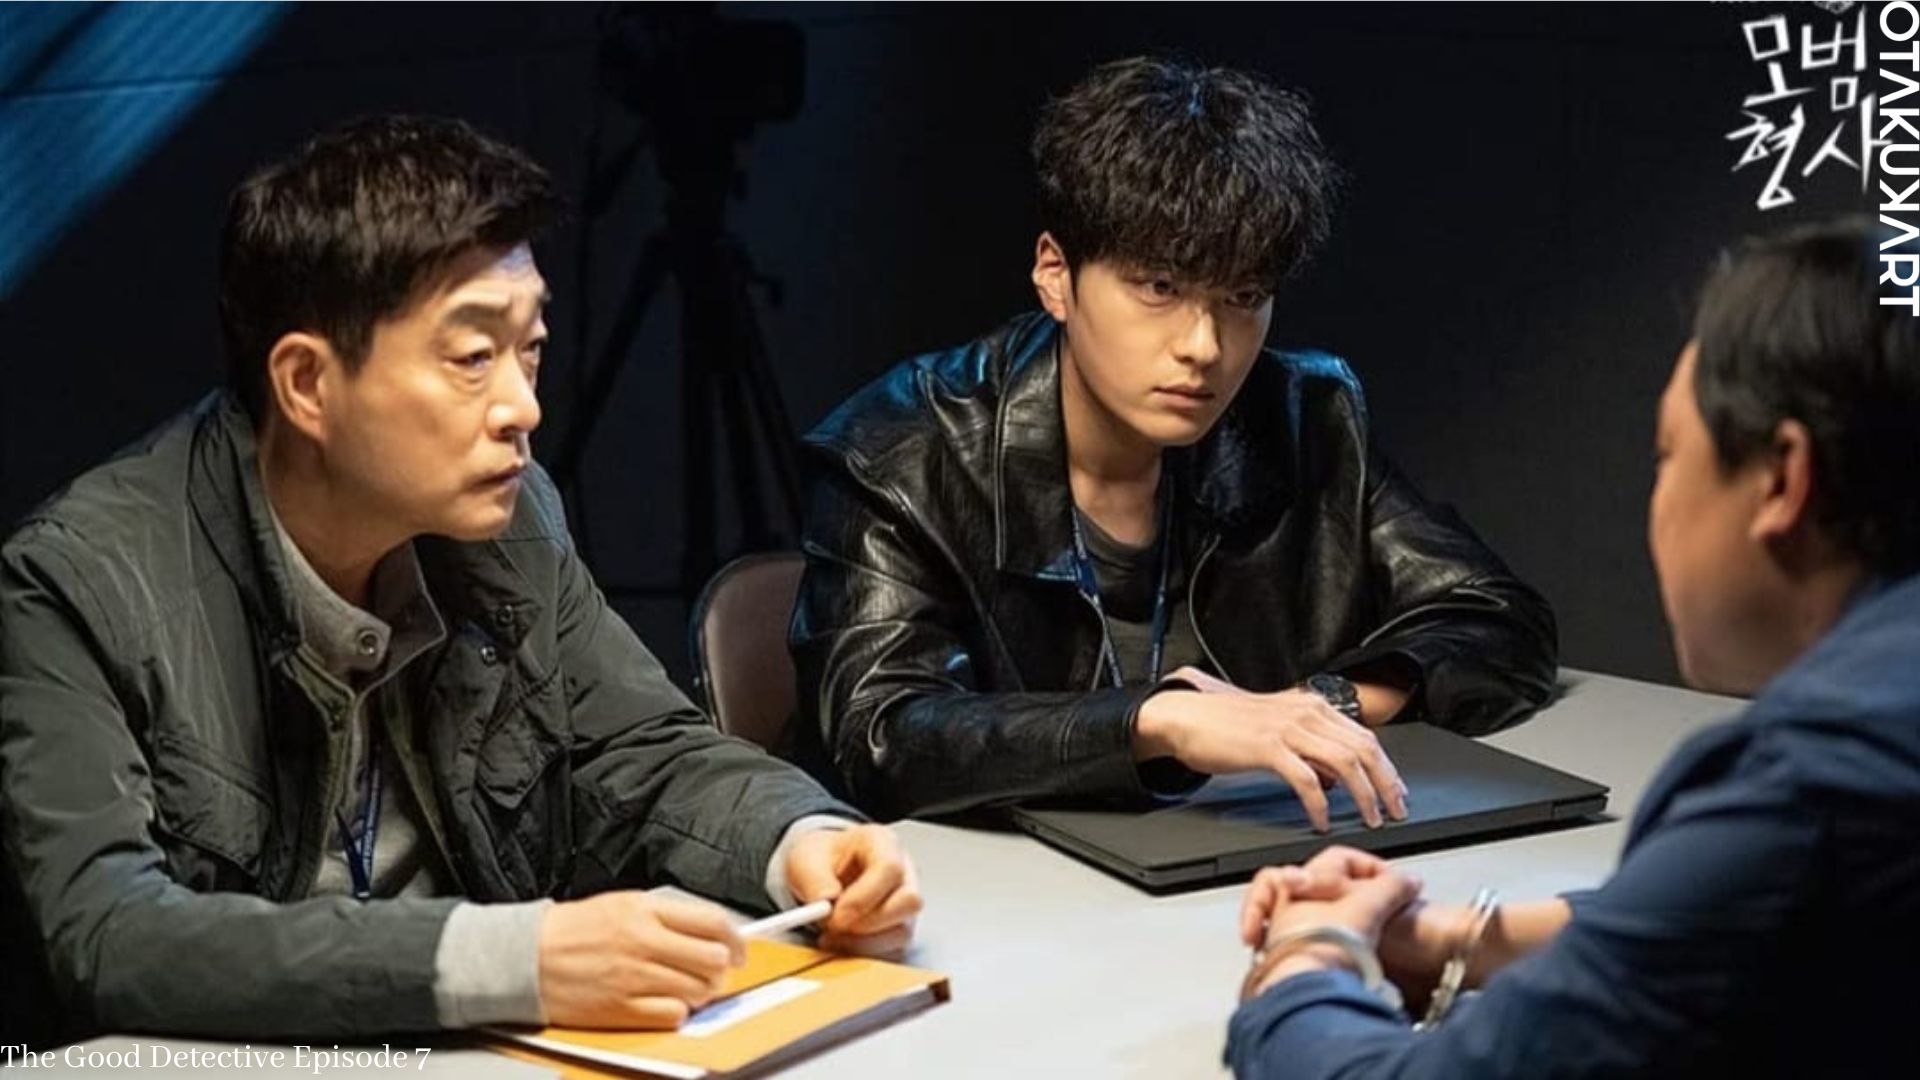 The Good Detective 2 Episode 7 Release Date: What Are the Good Detectives Up to Next?